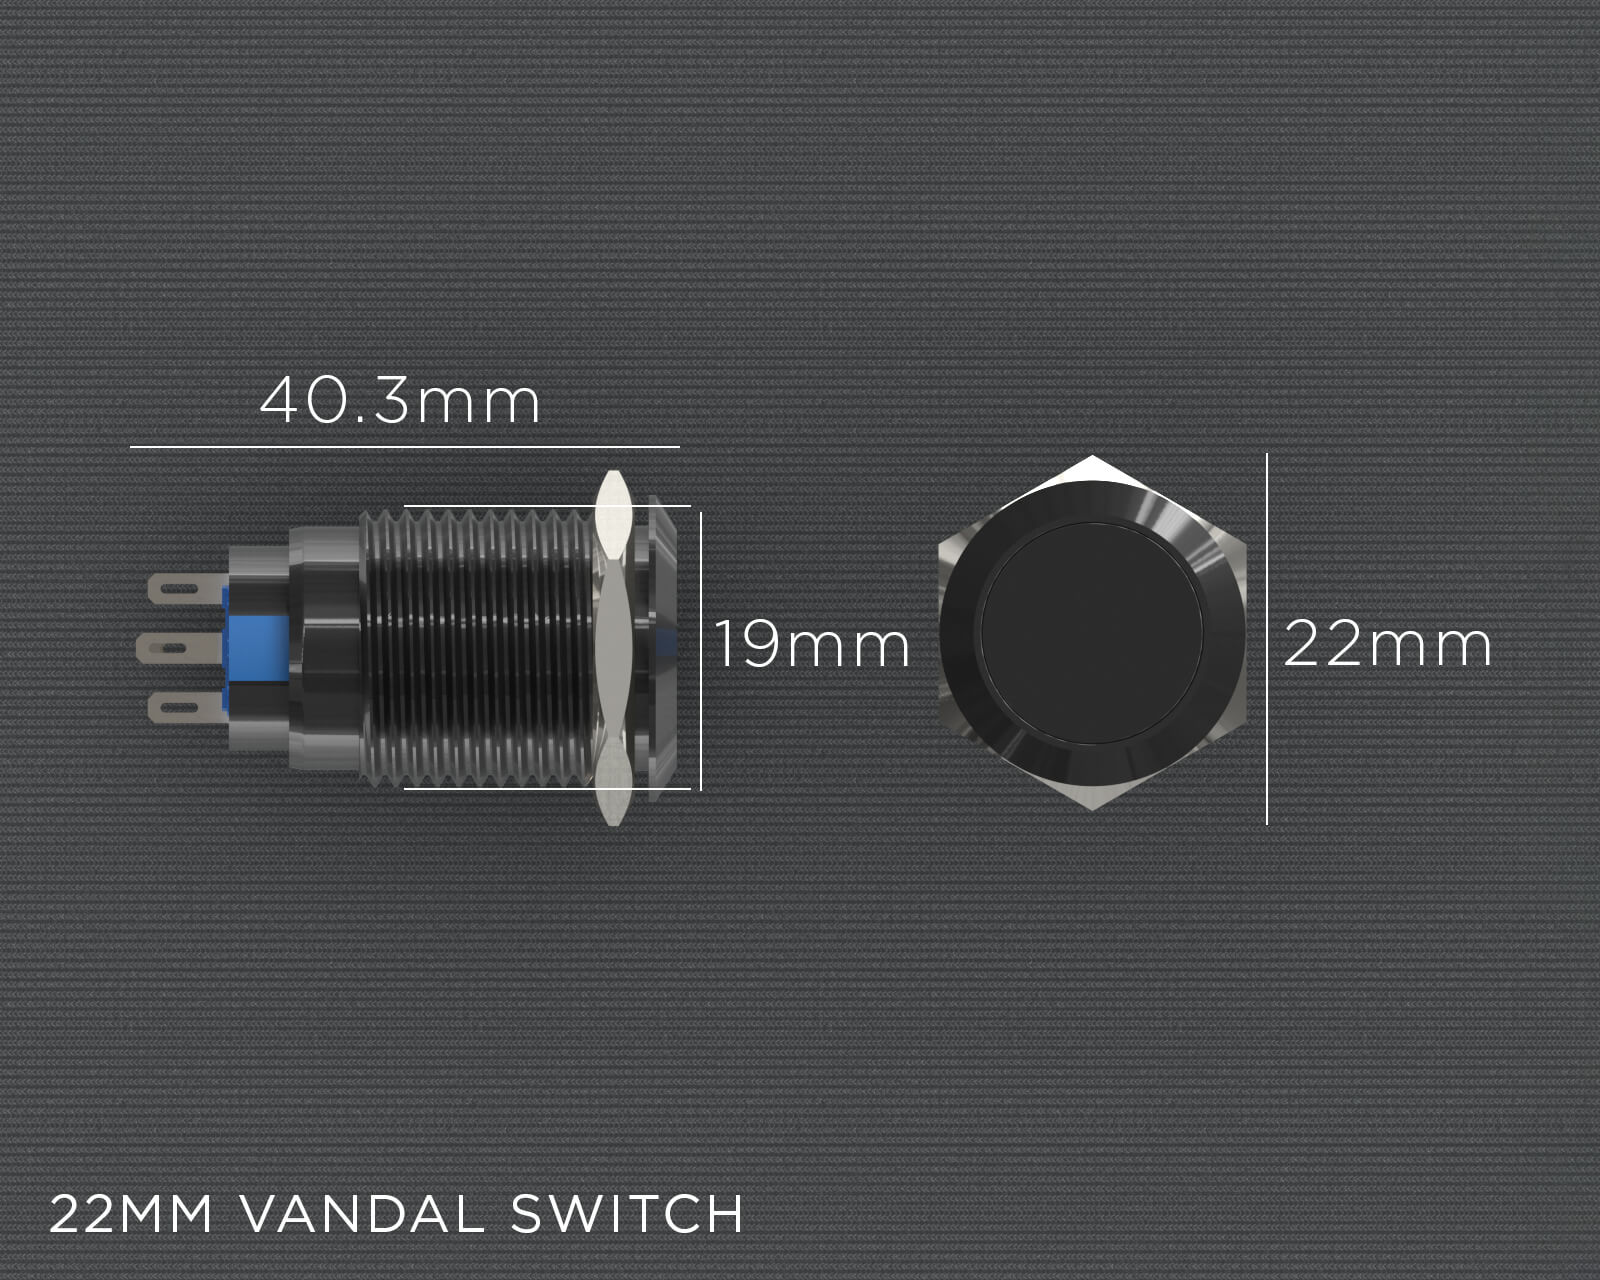 PrimoChill Silver Aluminum Latching Vandal Resistant Switch - 22mm - PrimoChill - KEEPING IT COOL